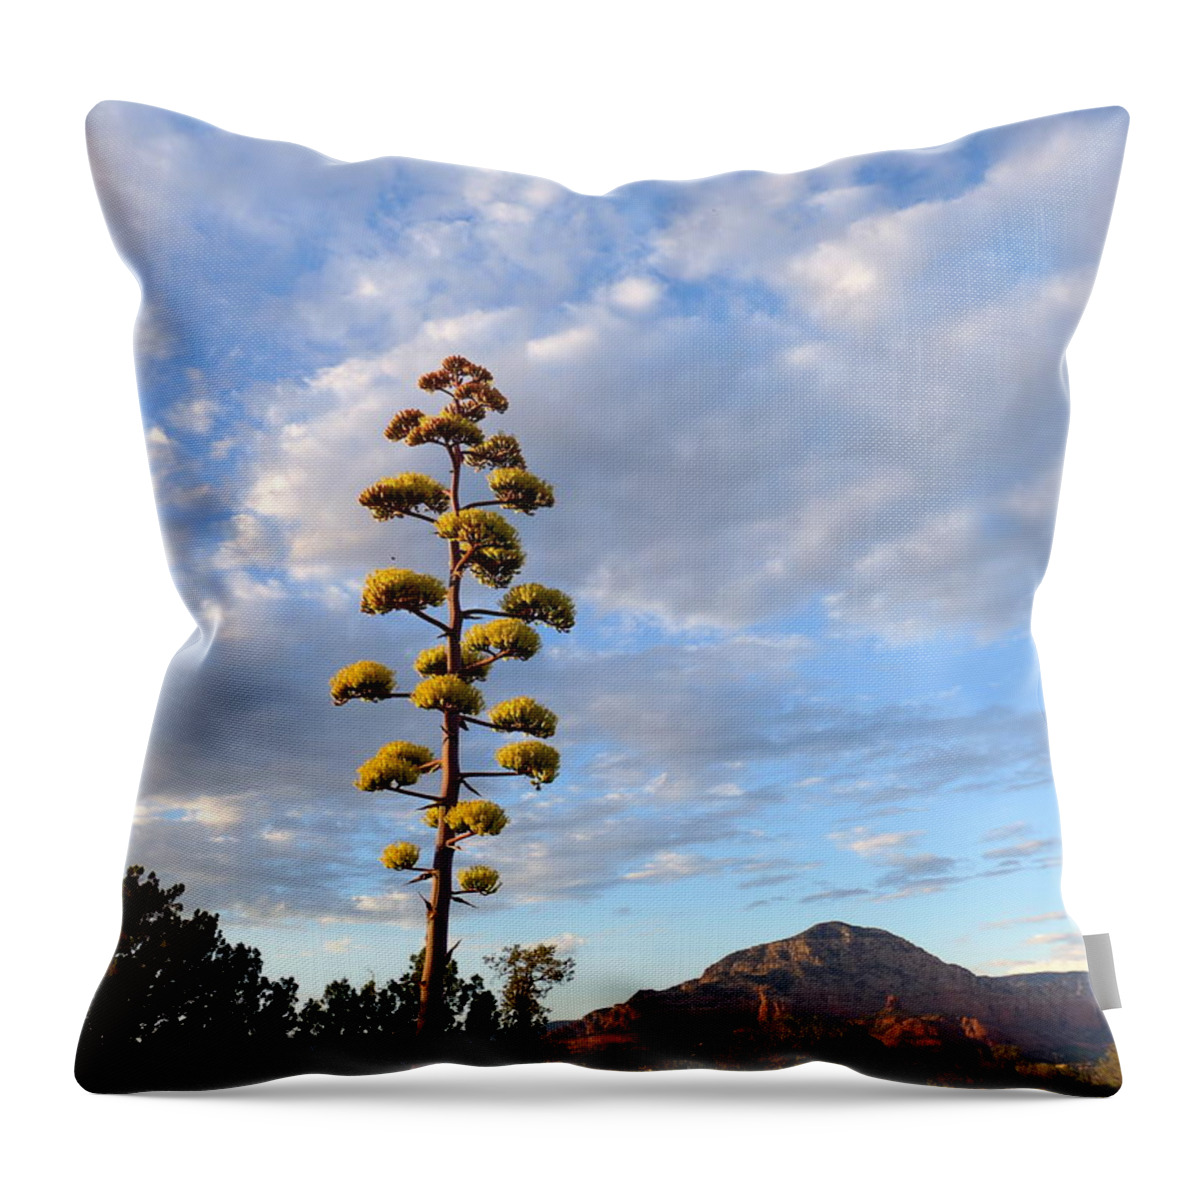 Arizona Throw Pillow featuring the photograph Arizona Century Plant in Bloom by Mars Besso